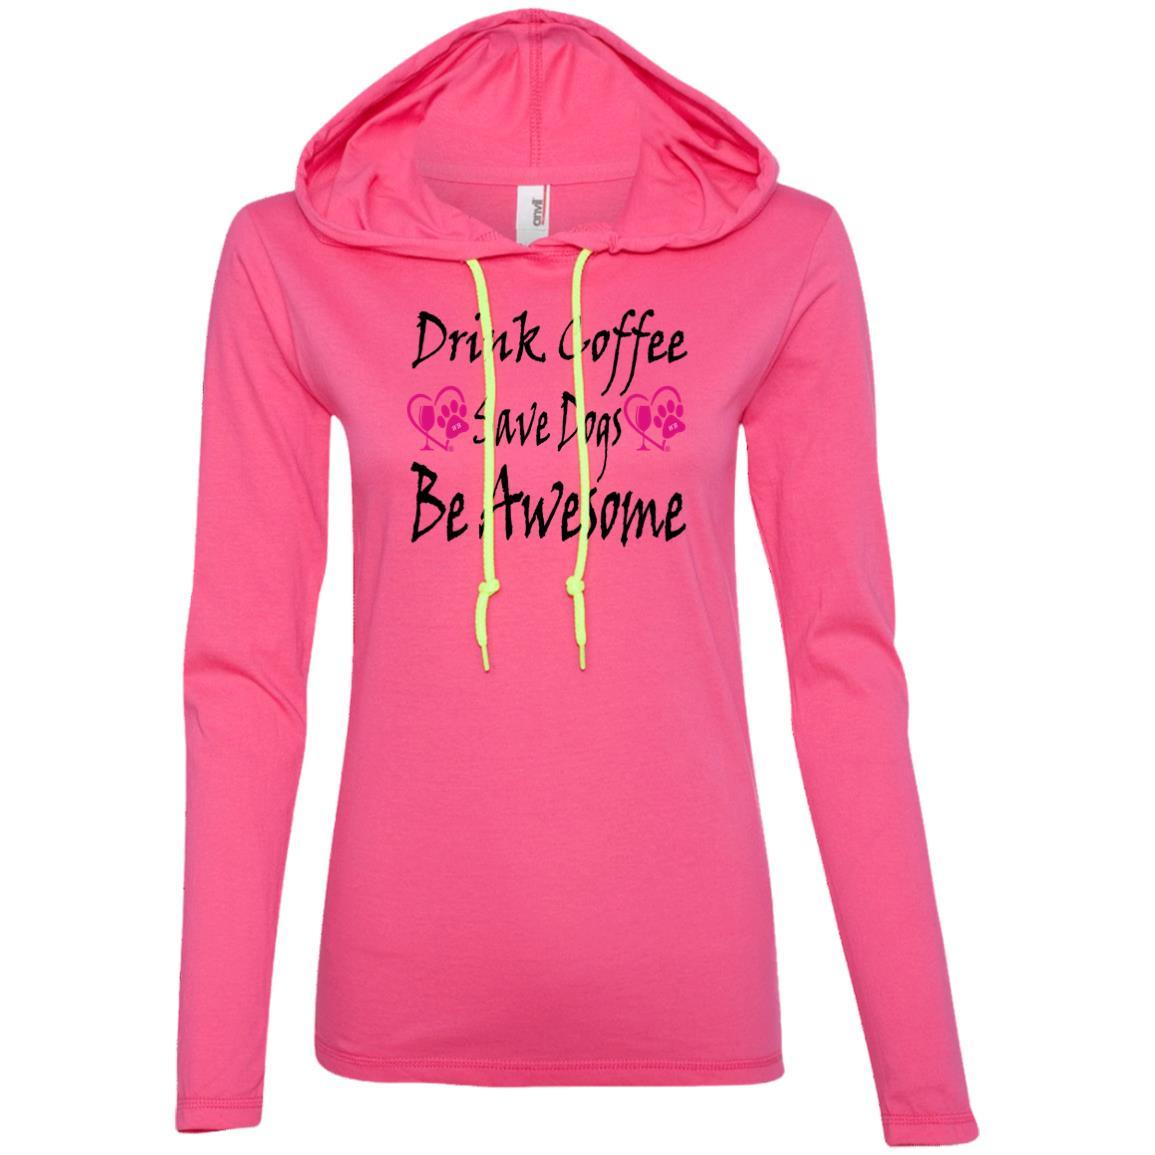 T-Shirts Hot Pink/Neon Yellow / S Winey Bitches Co "Drink Coffee Save Dogs Be Awesome" Ladies' LS T-Shirt Hoodie WineyBitchesCo